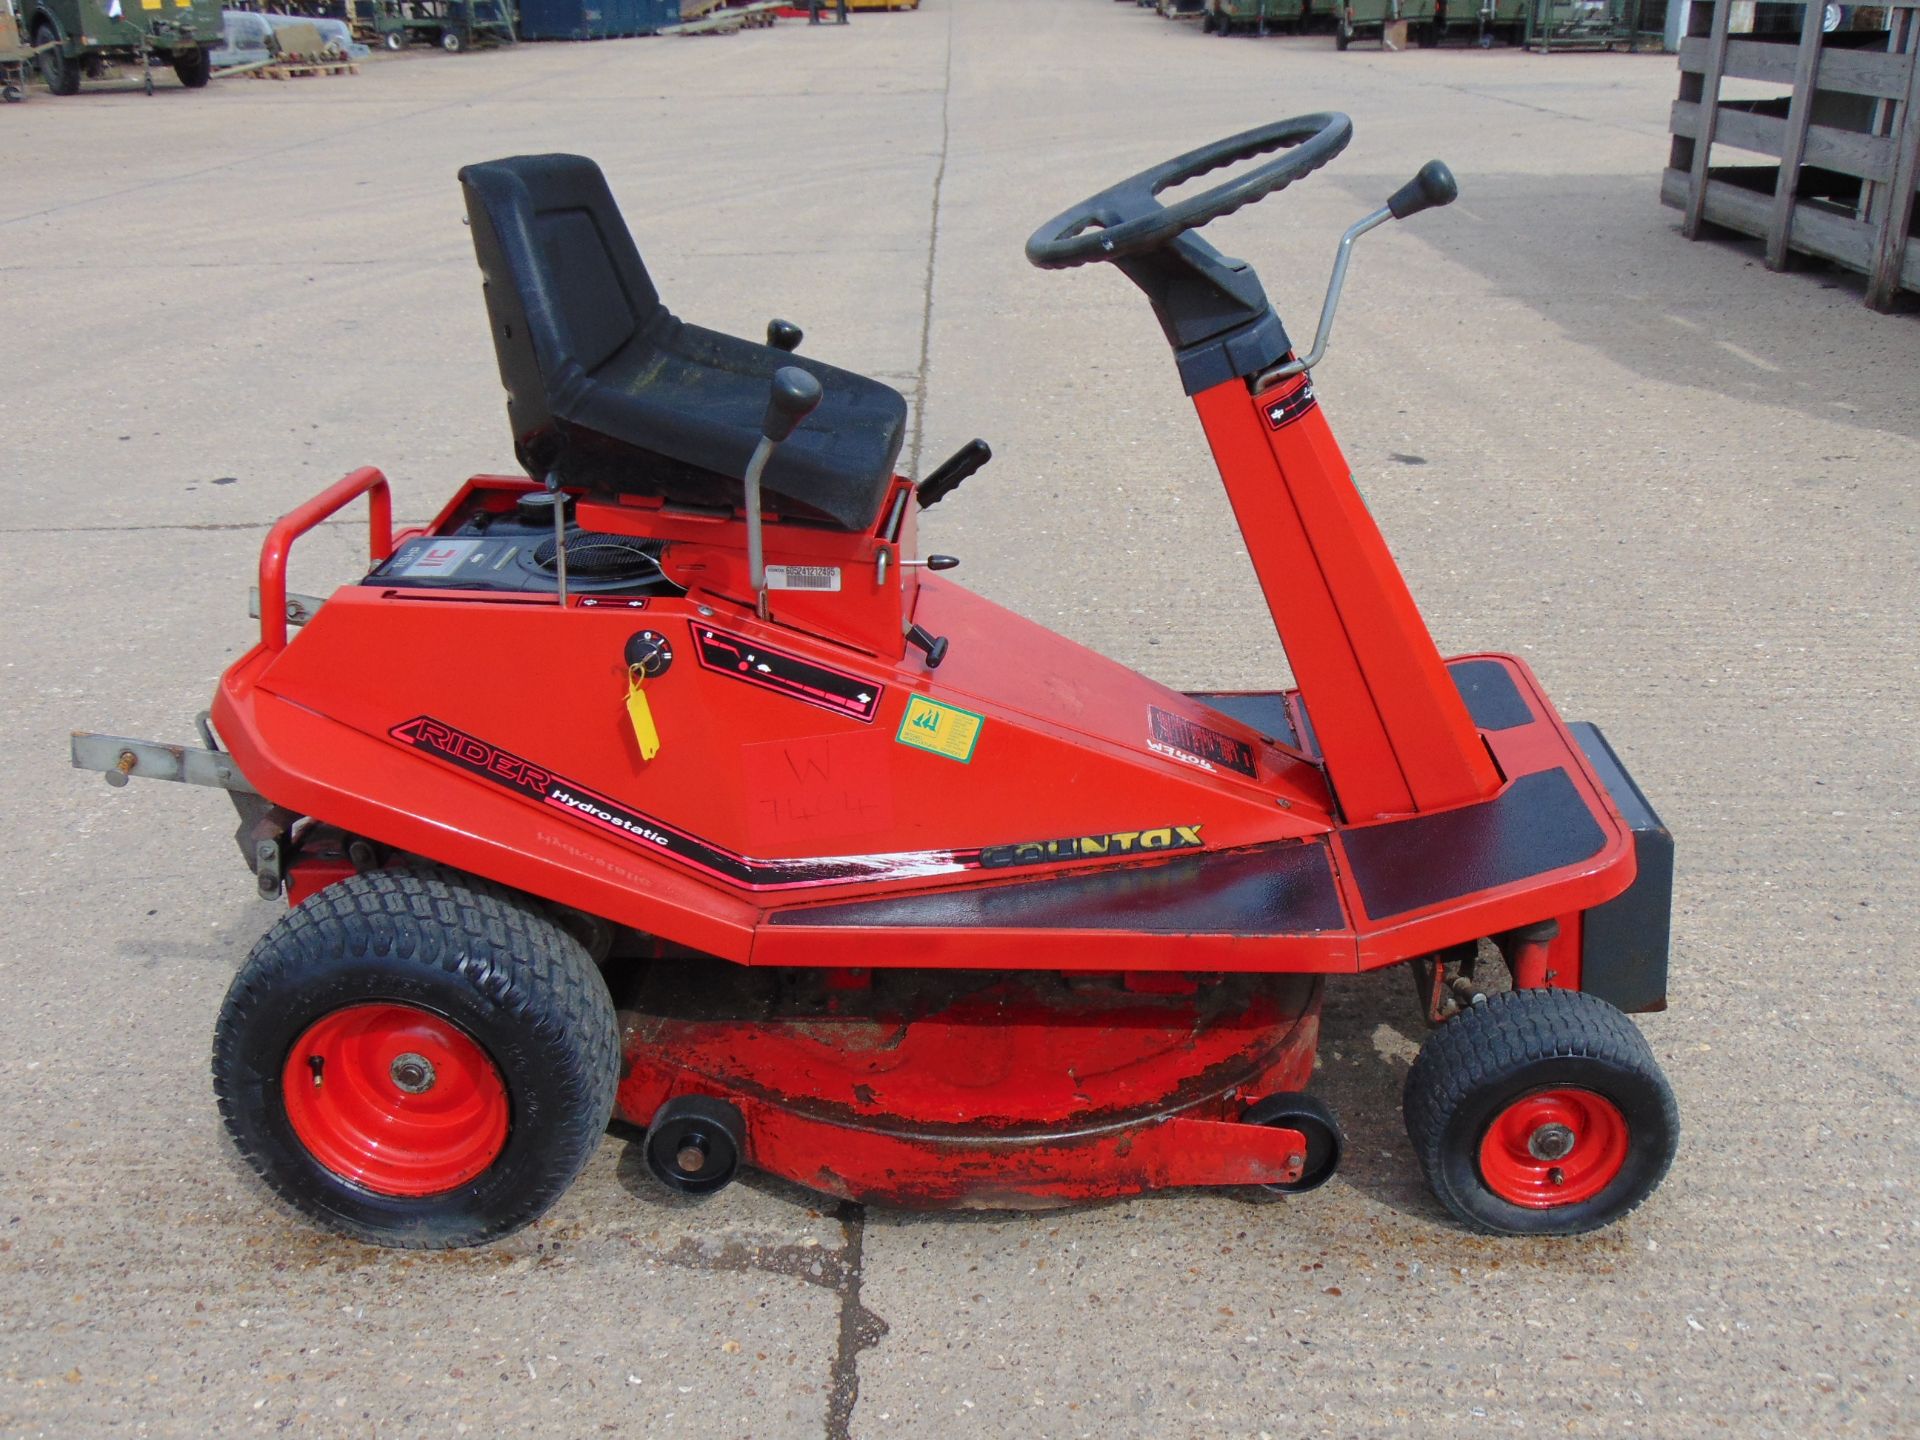 Countax Rider 30 Ride On Mower - Image 6 of 11